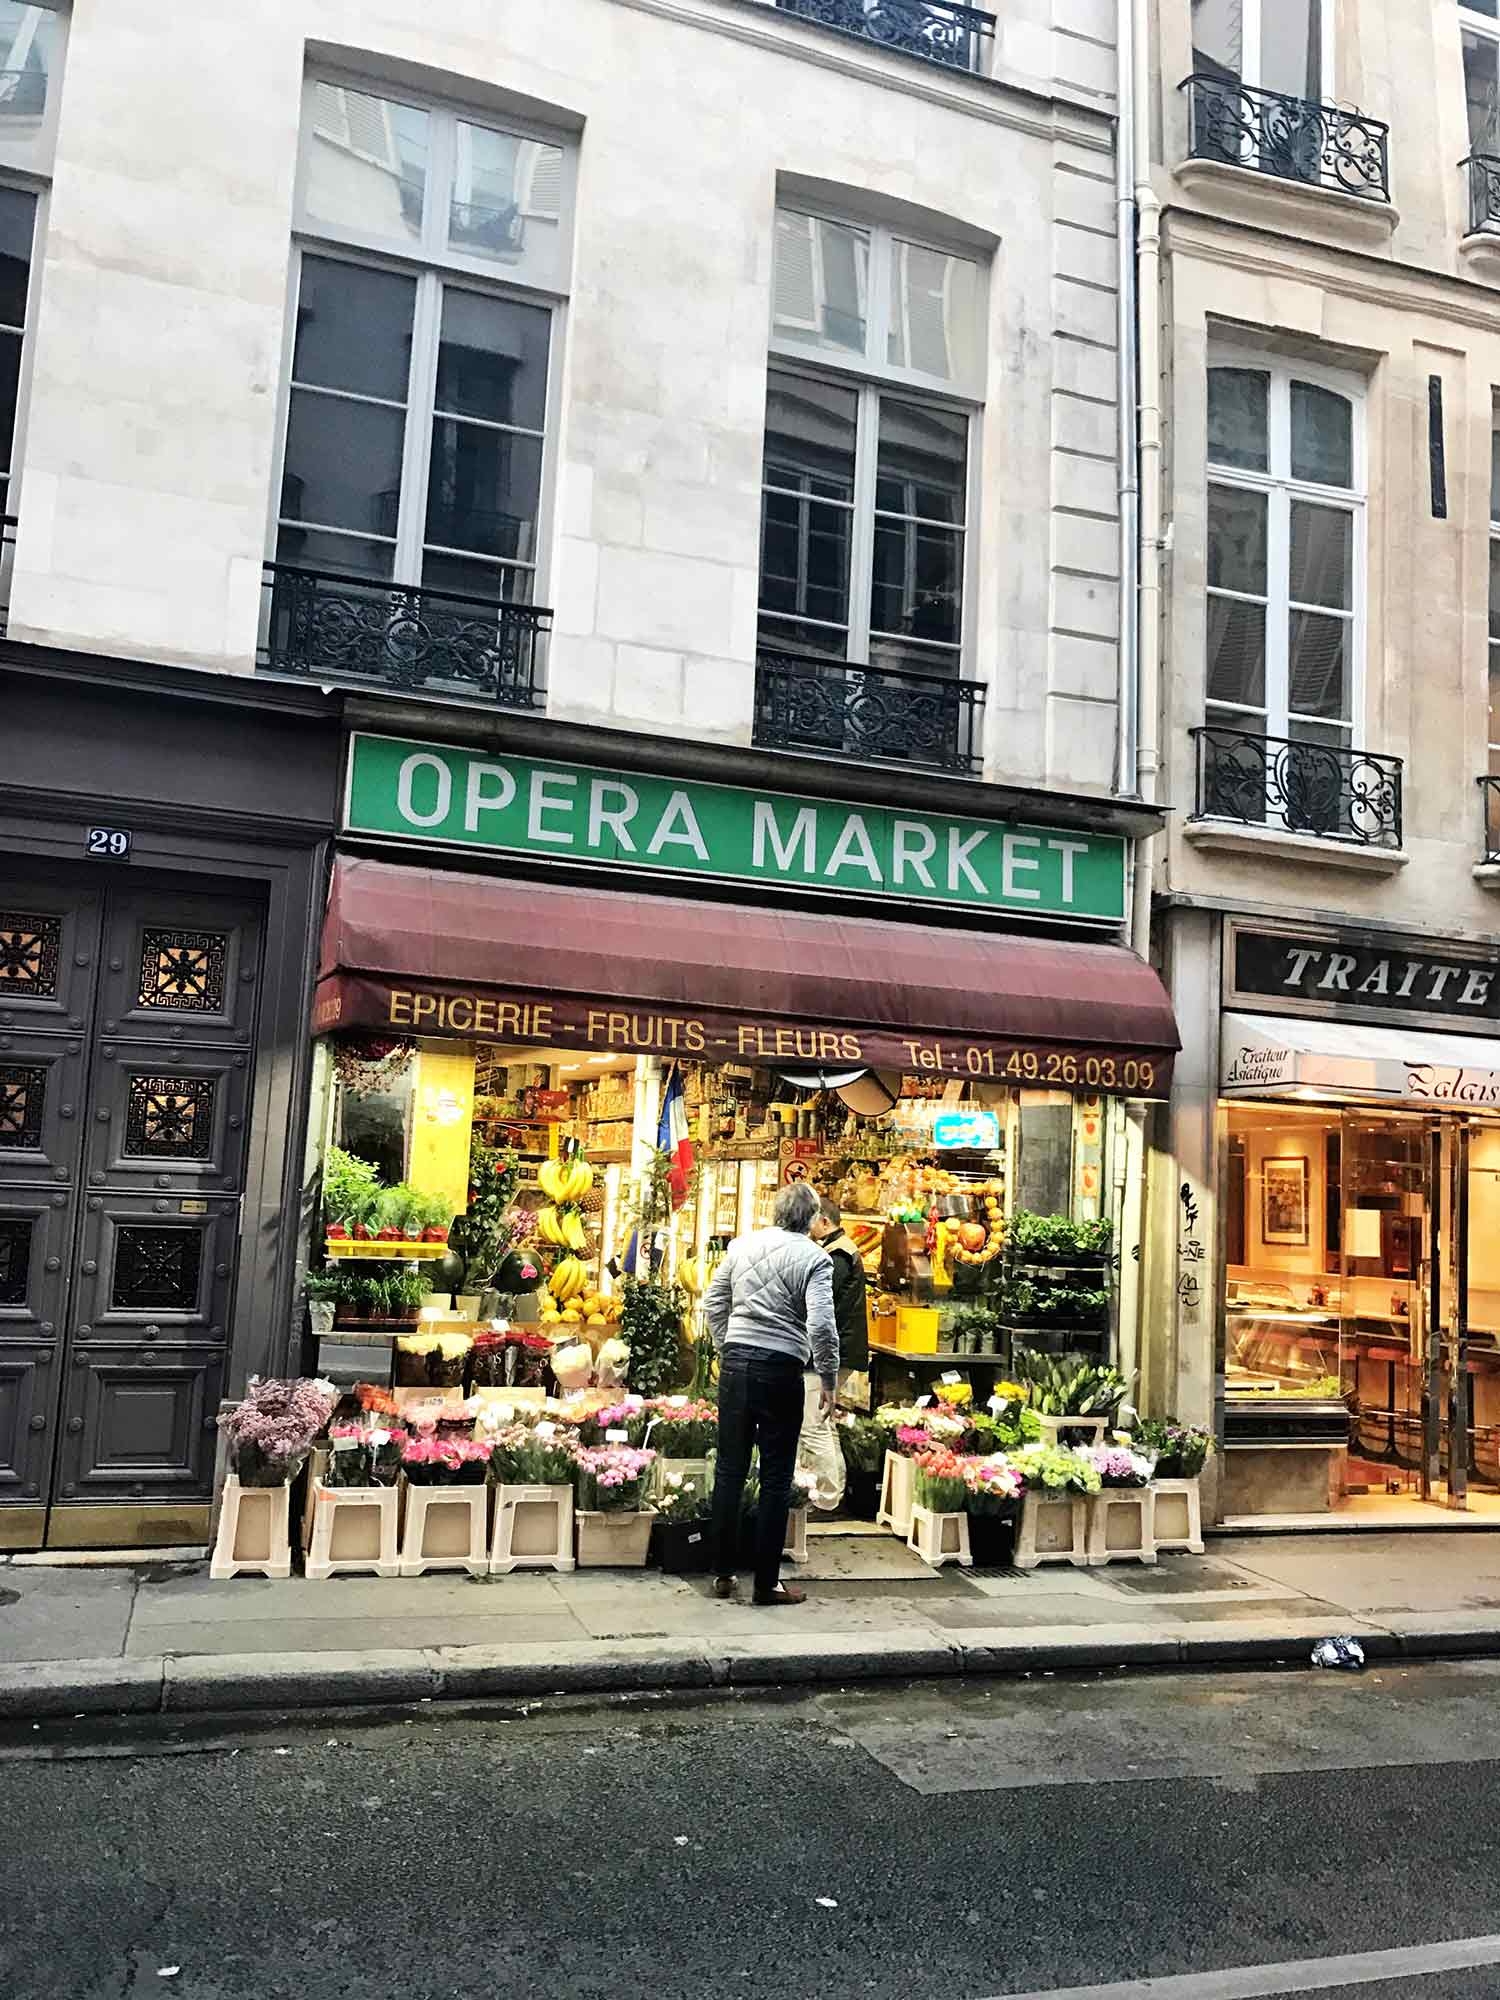 Small stores along the street in central Paris. December 2018 